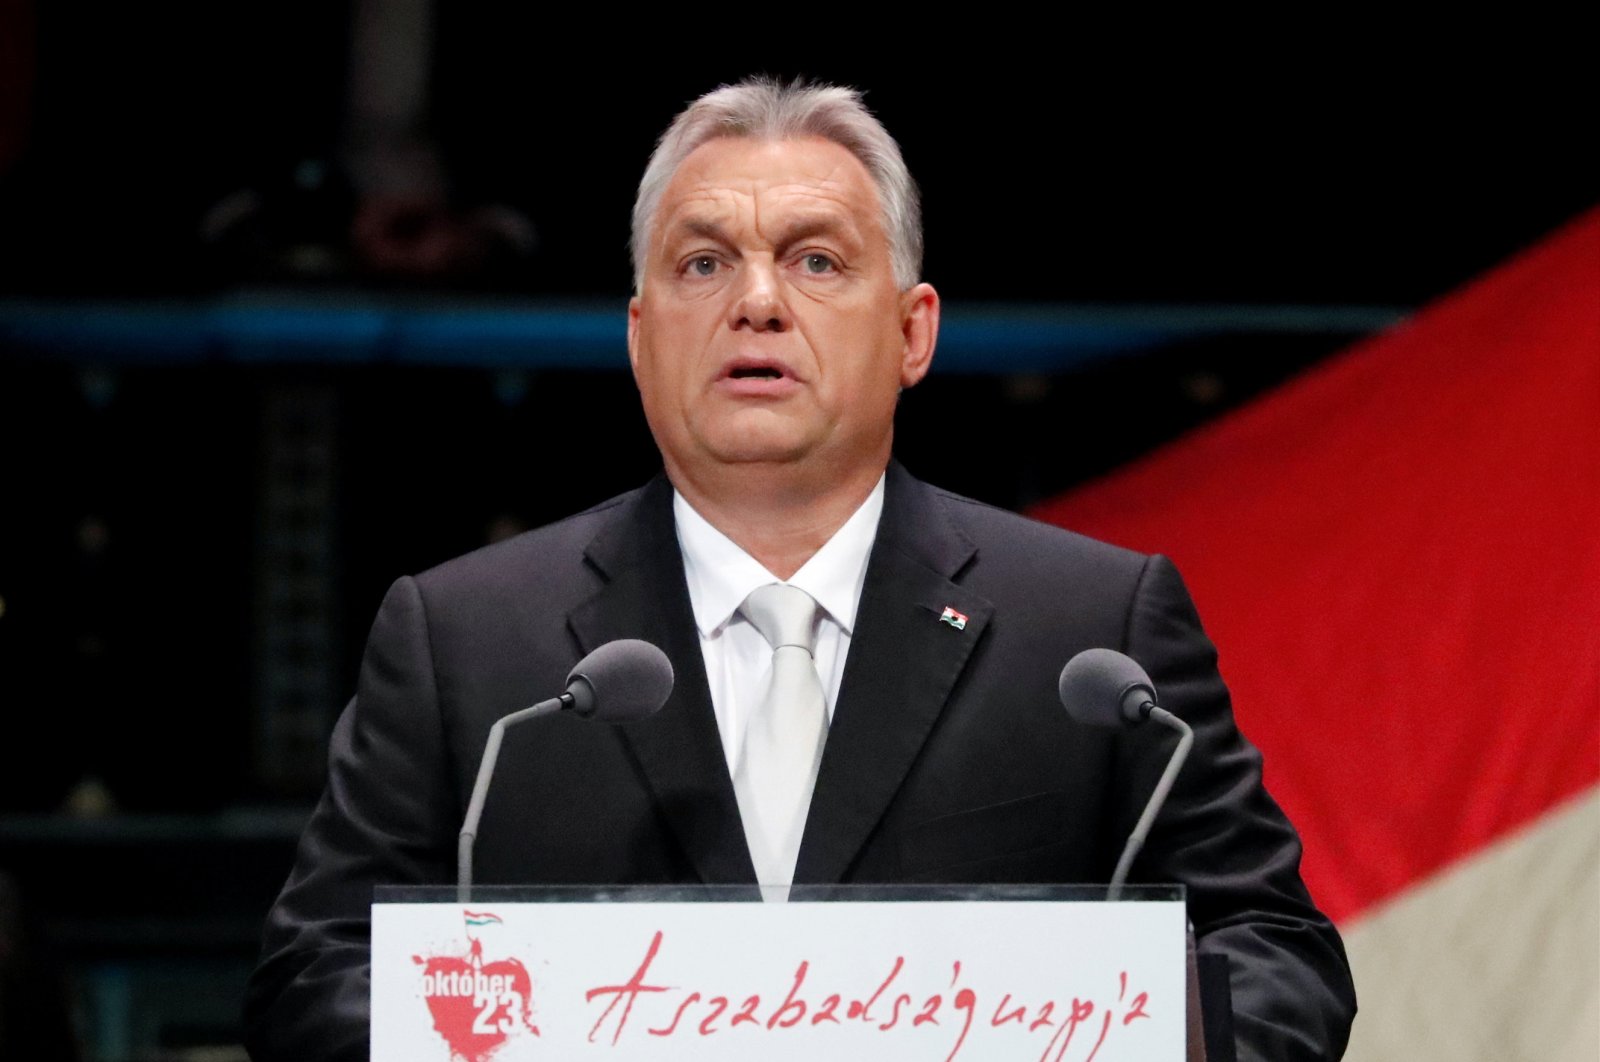 Hungarian Prime Minister Viktor Orban delivers a speech in the Liszt Ferenc Academy of Music during the celebrations of the 63rd anniversary of the Hungarian Uprising of 1956, in Budapest, Hungary, October 23, 2019. (Reuters Photo)